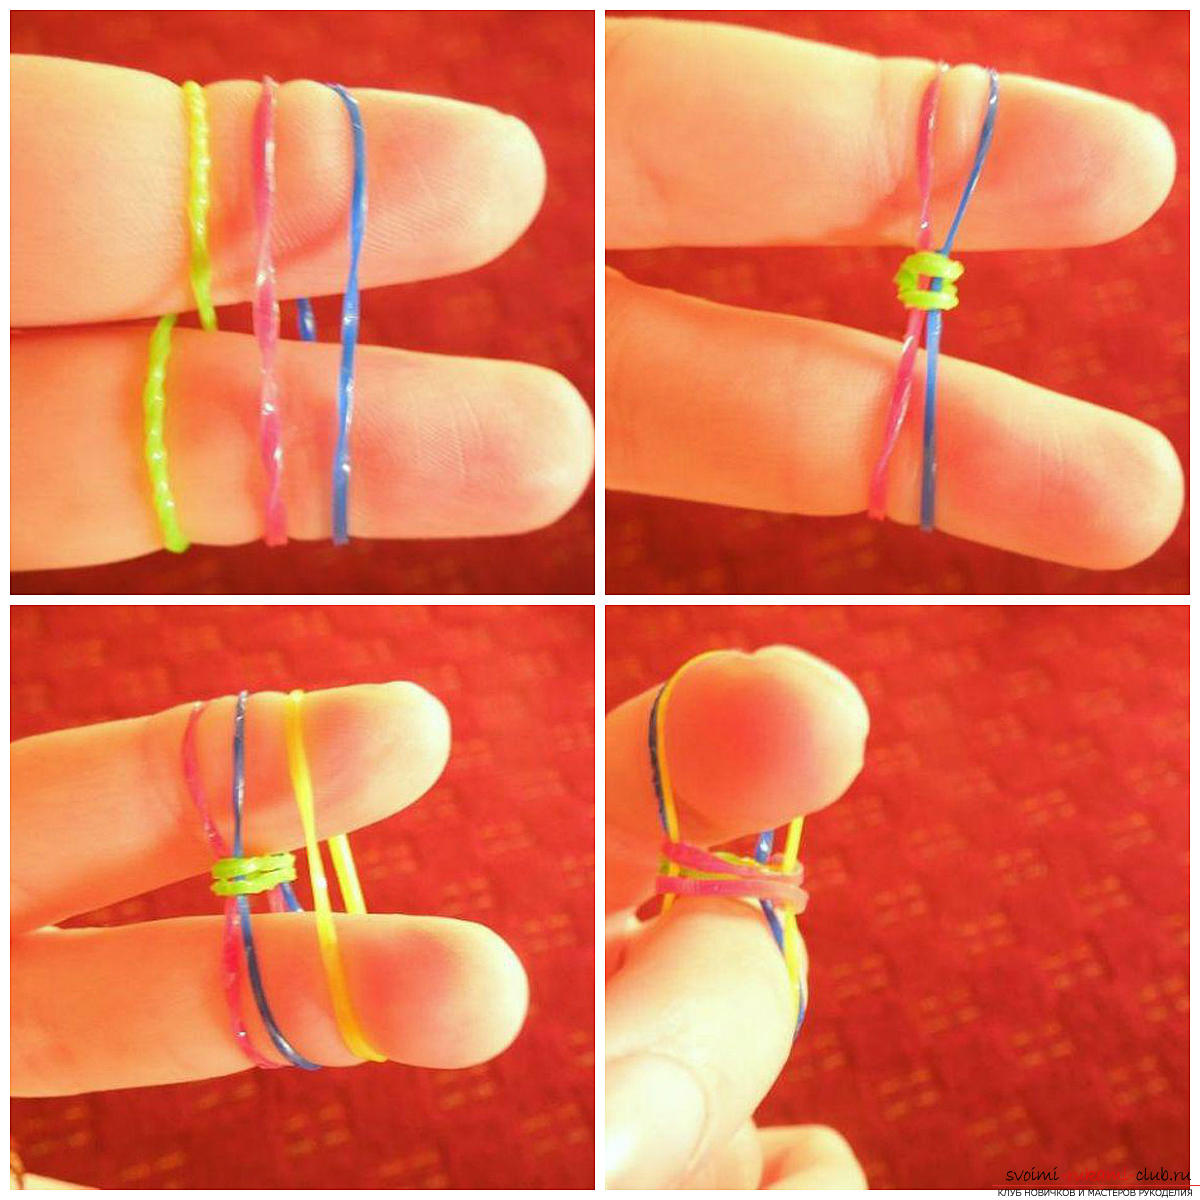 Bracelets made of rubber bands with their own hands, how to weave a bracelet made of rubber bands, weaving bracelets on the fingers, using a slingshot when manufacturing the bracelets with our own hands .. Photo # 2